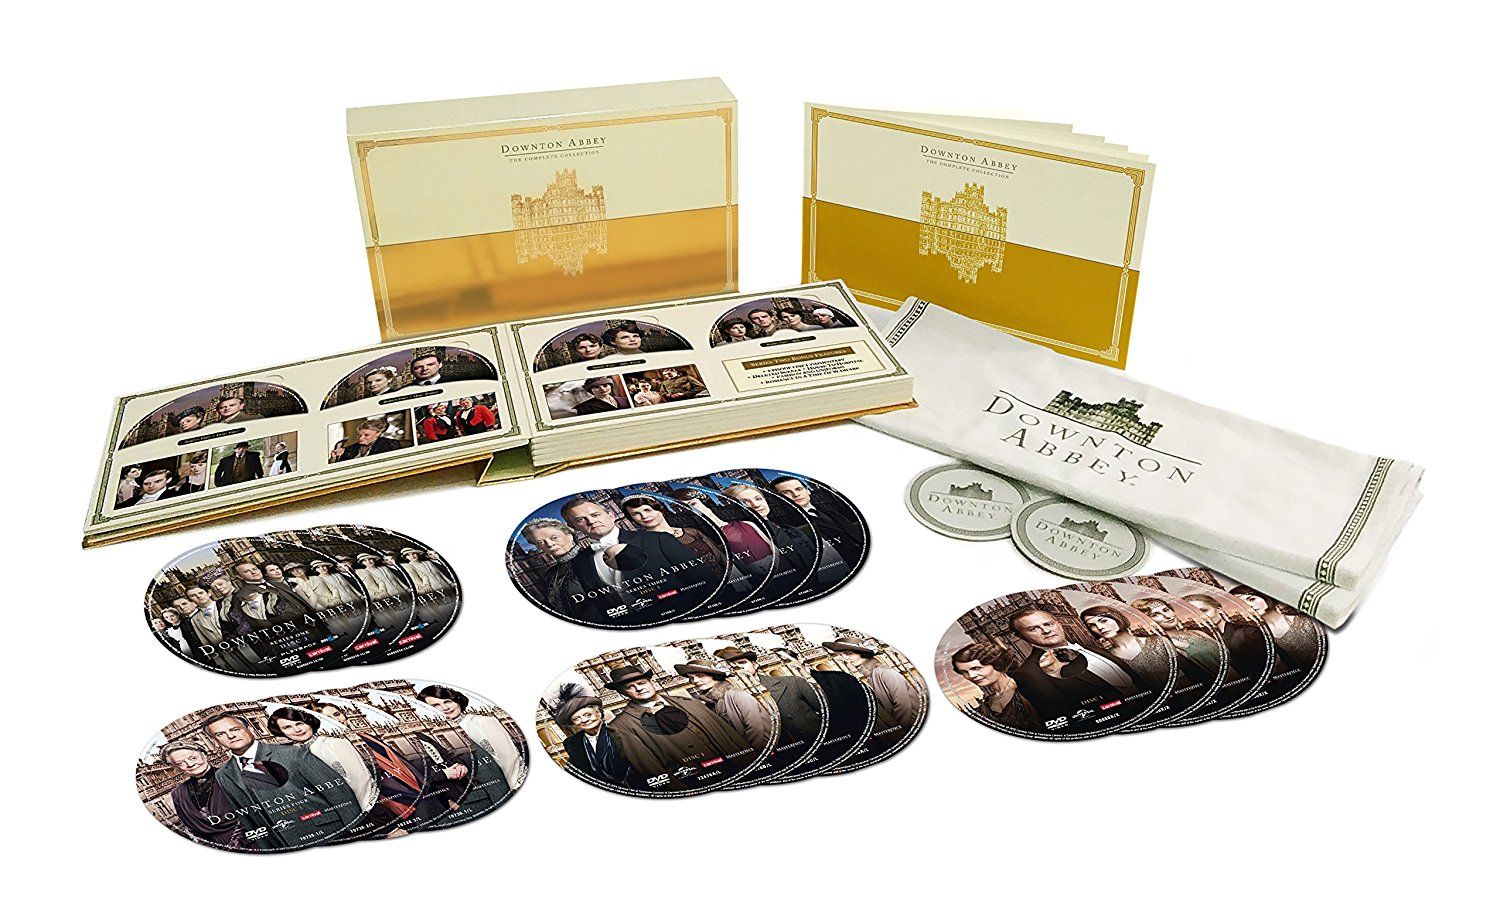 Downton Abbey Complete Limited Edition Set